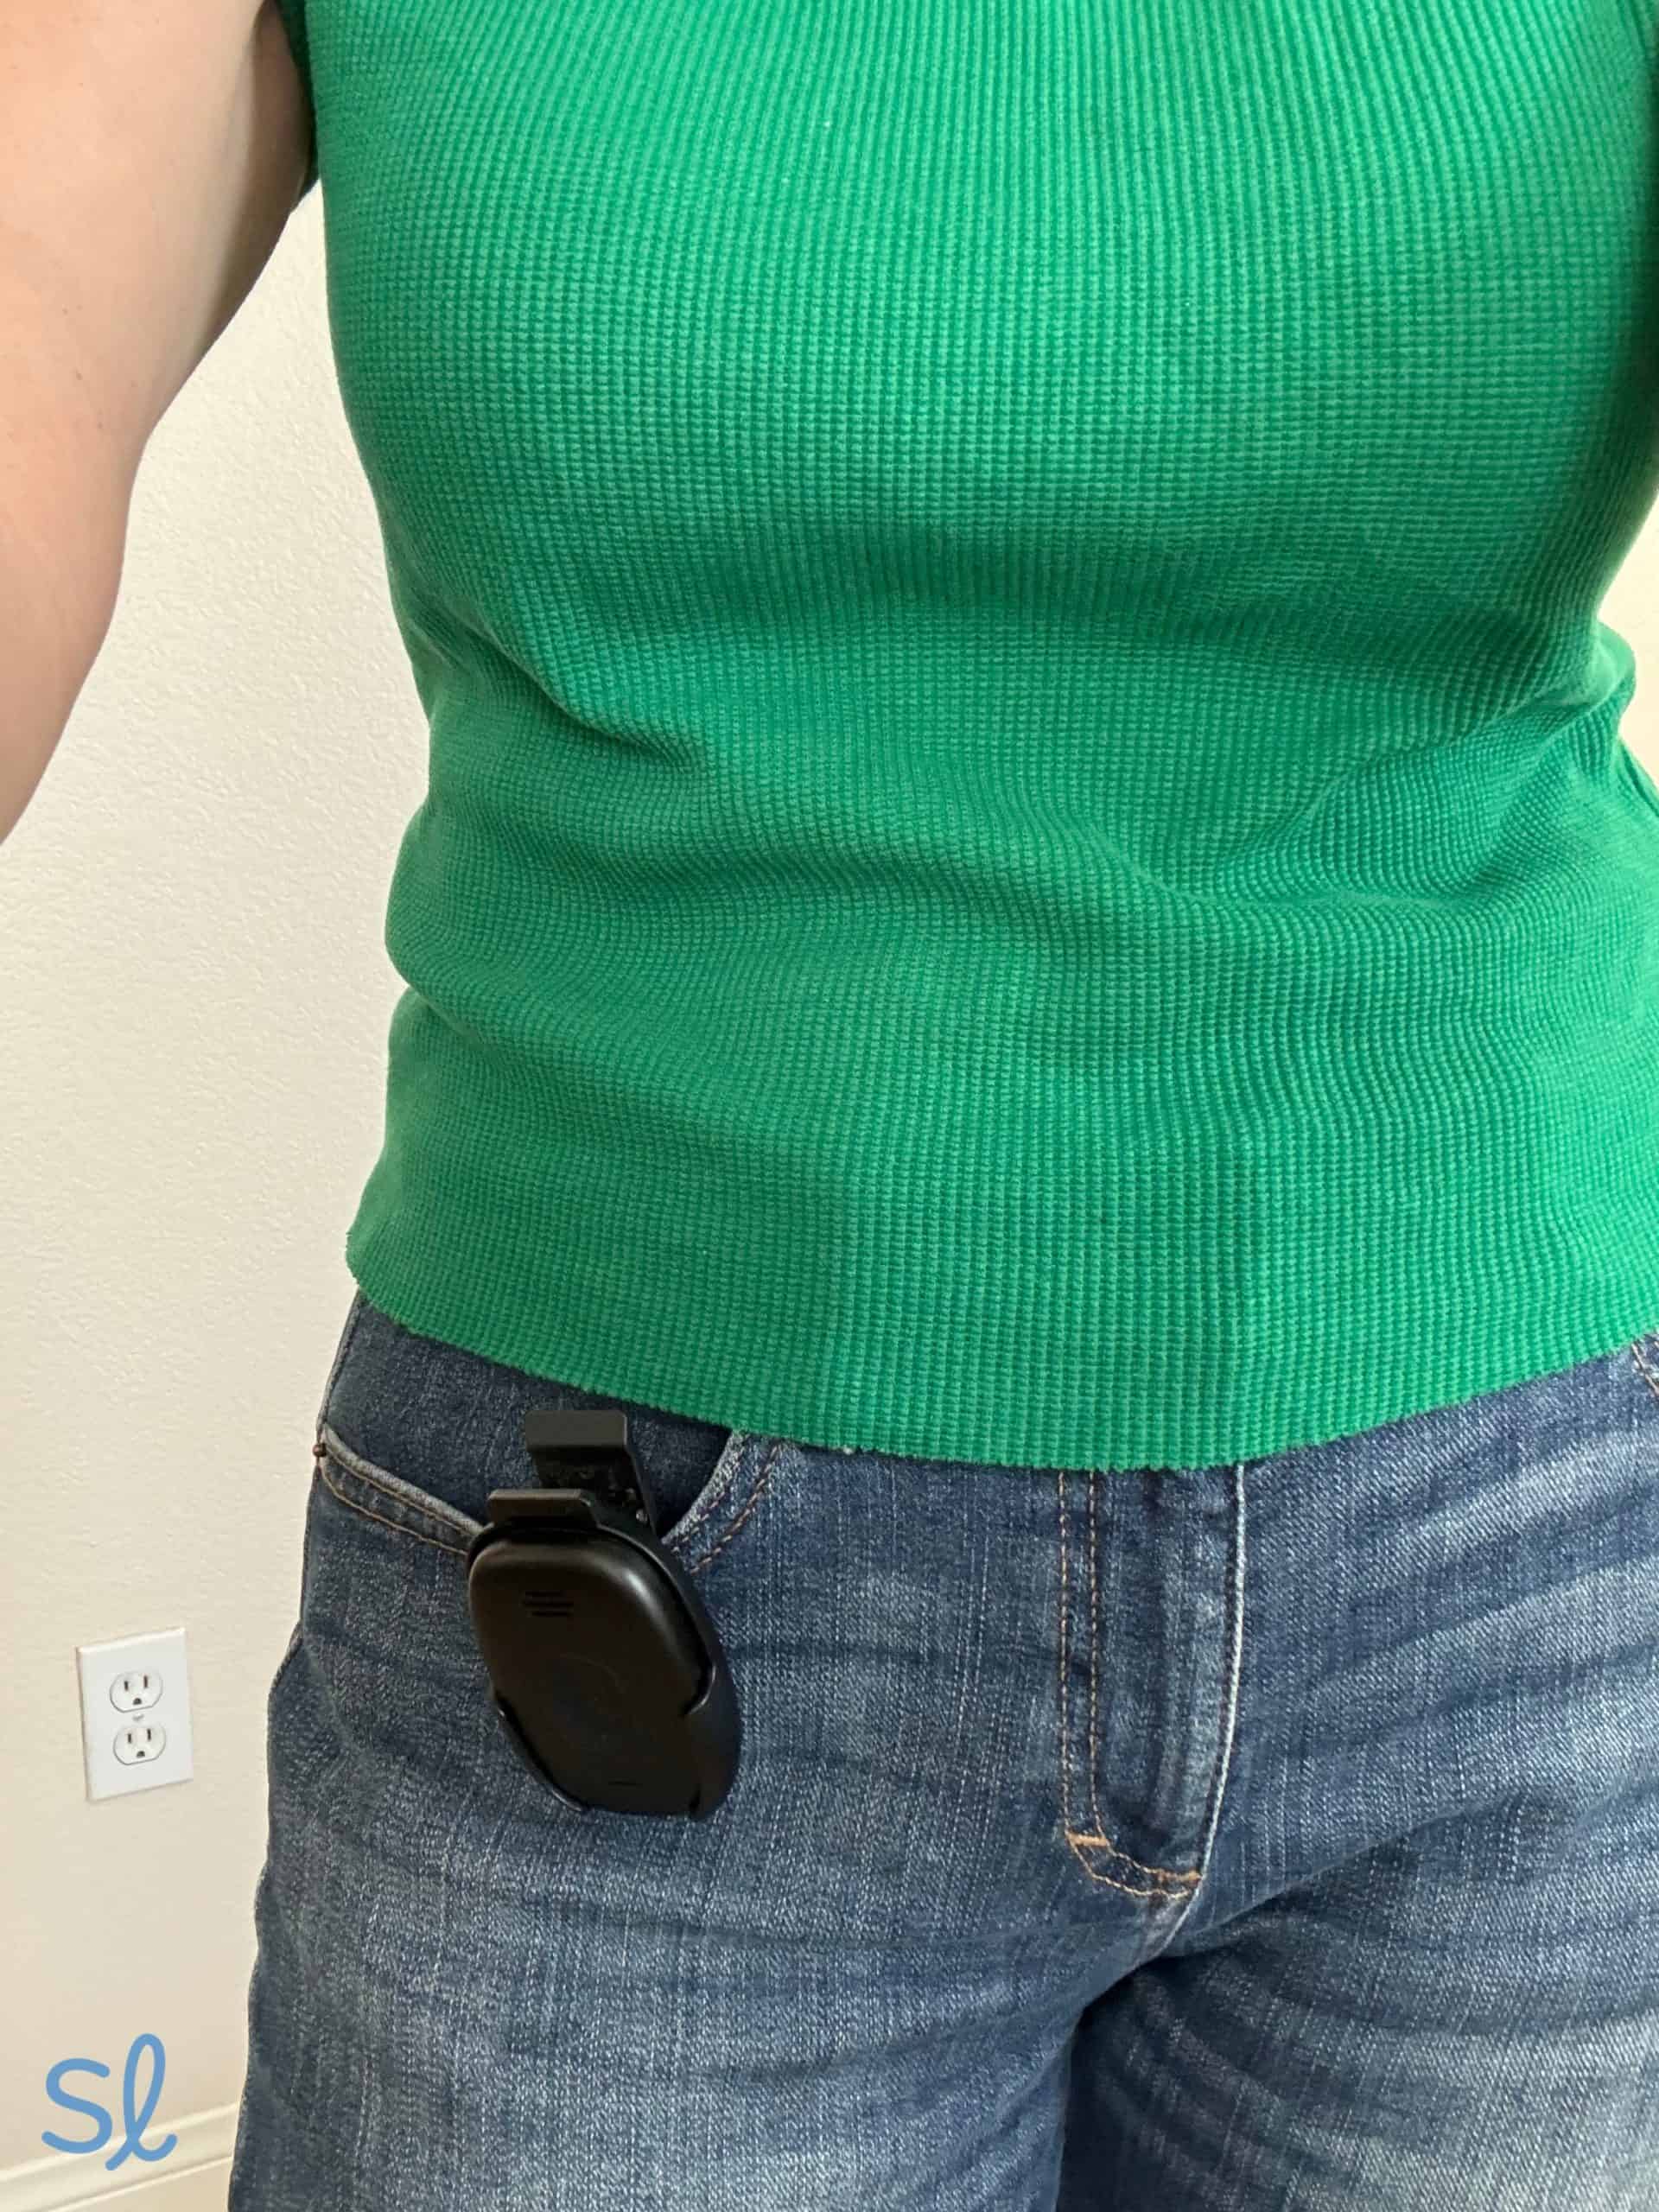 Wearing the Lively Mobile2 using the belt clip 